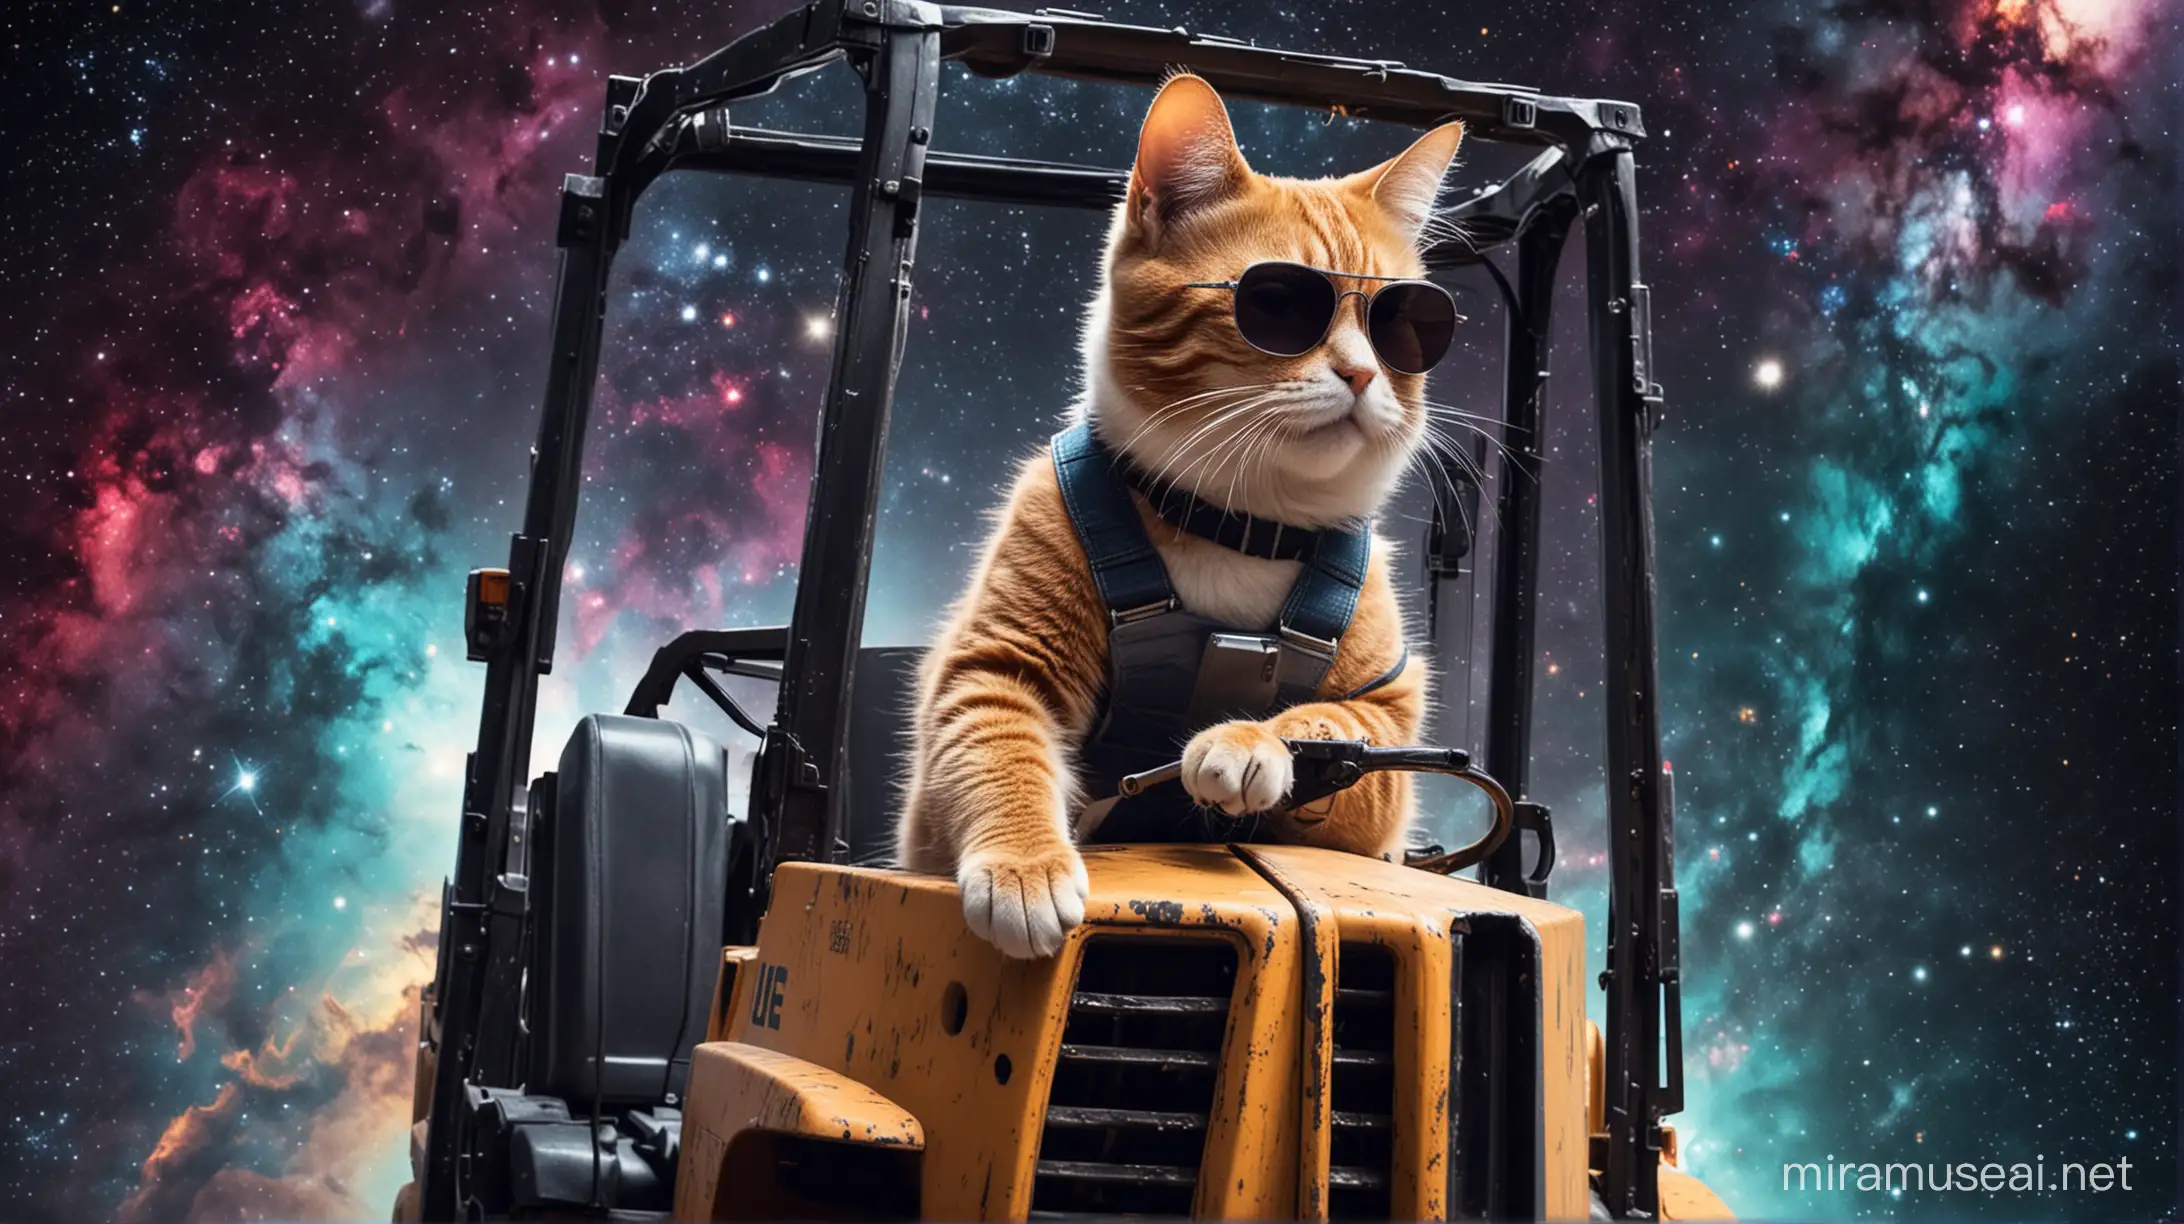 A cool cat in sunglasses riding a forklift in space